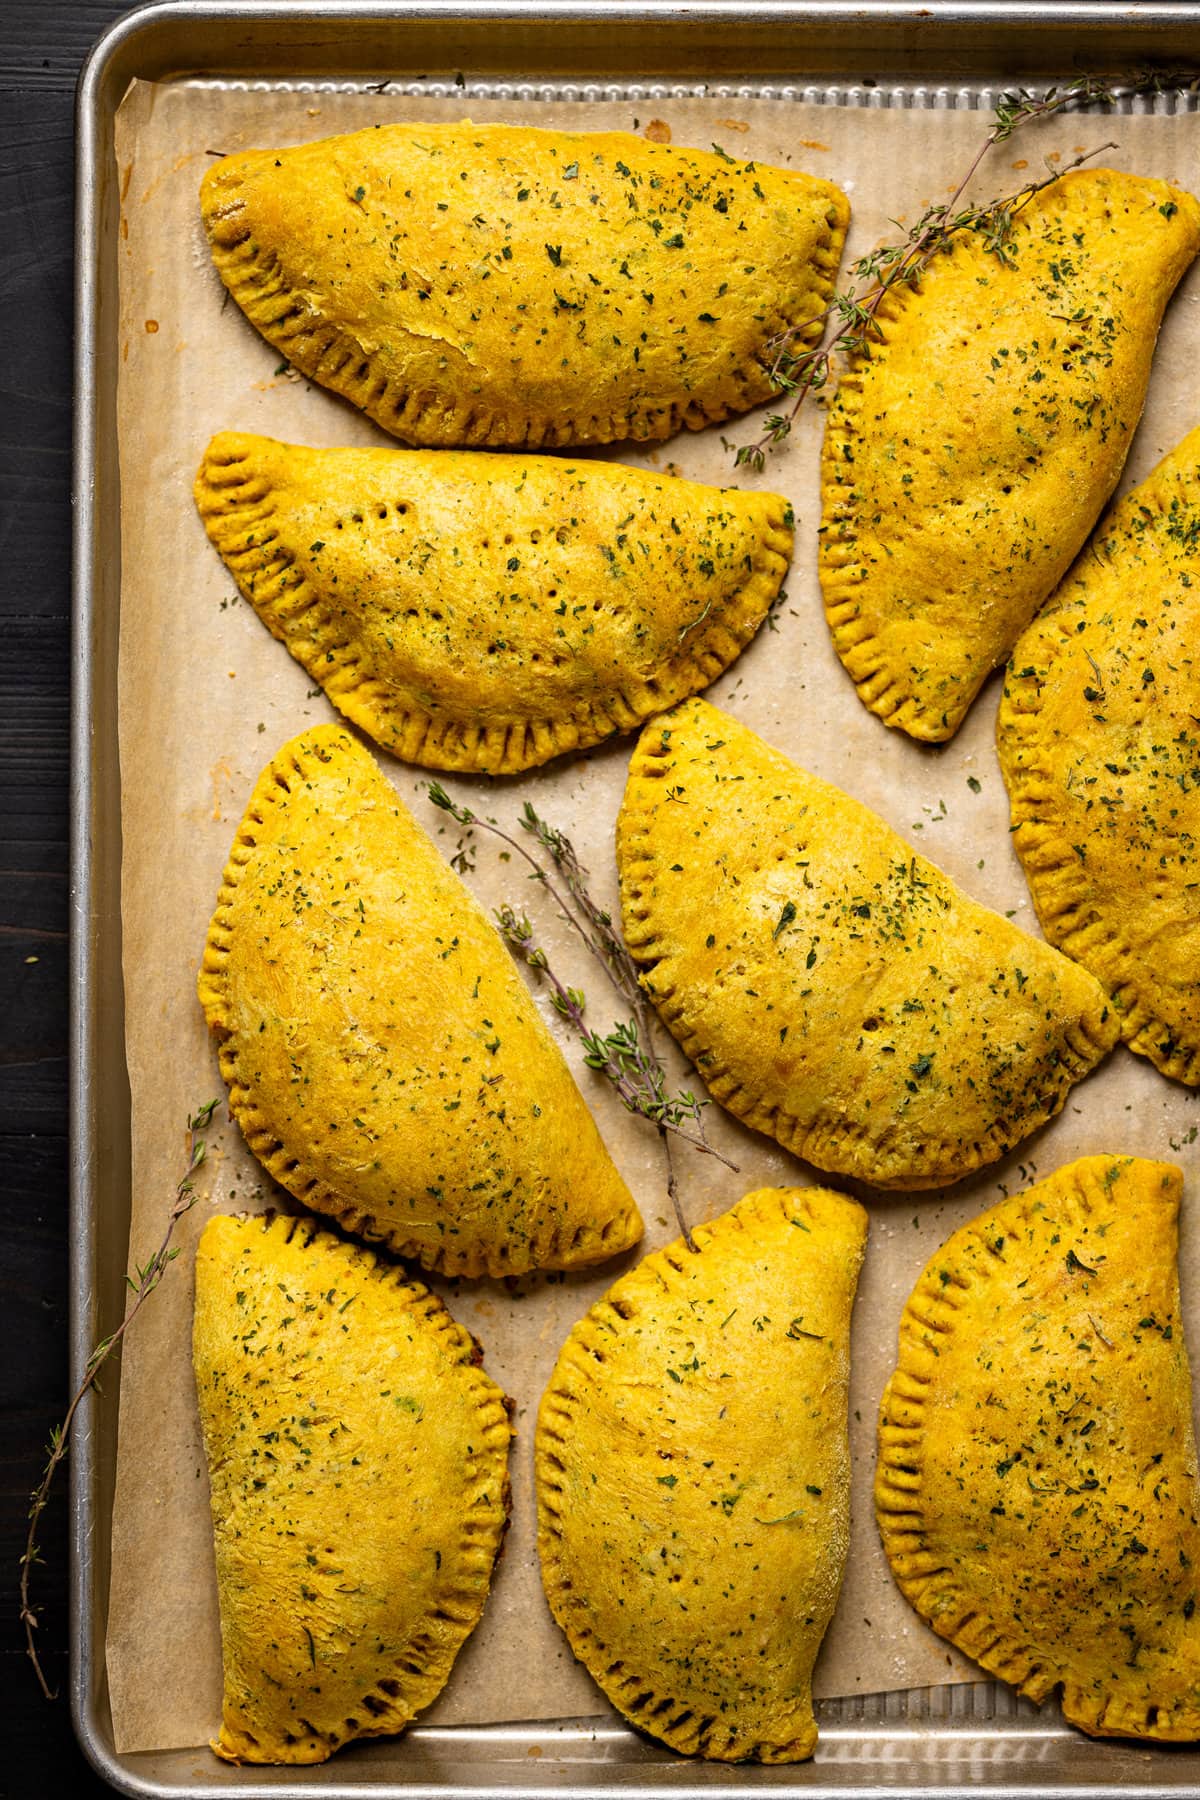 Vegan Jamaican Beef Patties on a baking sheet lined with parchment paper